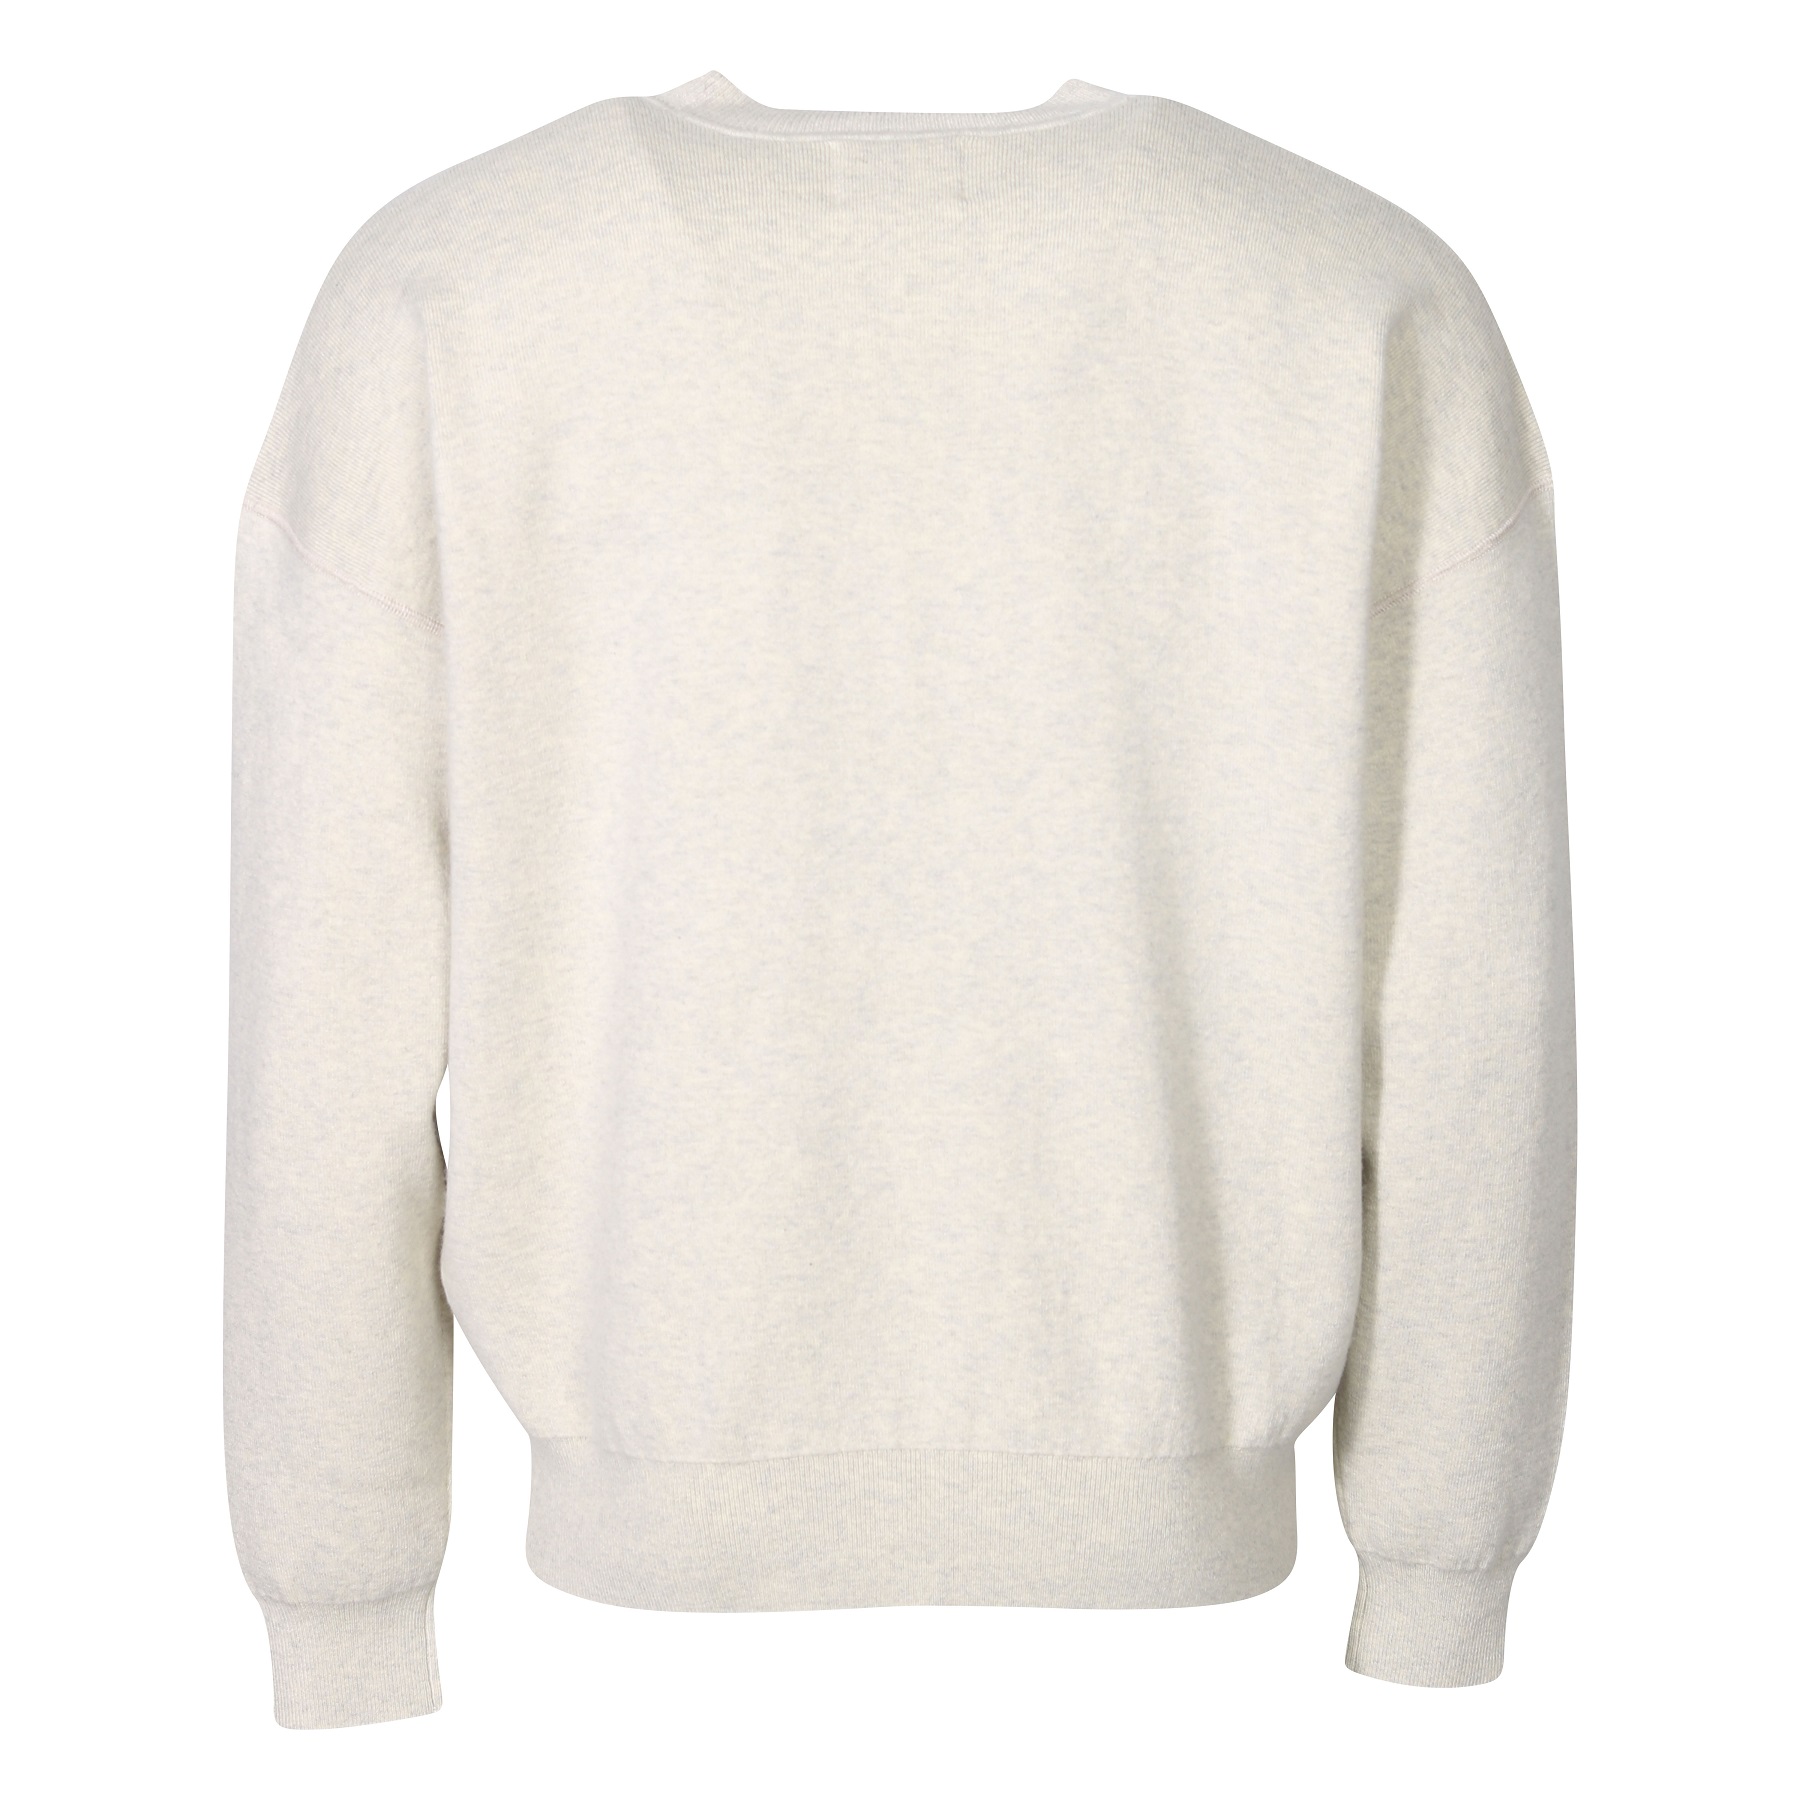 ISABEL MARANT Atley Cotton Knit Pullover in Ecru XL